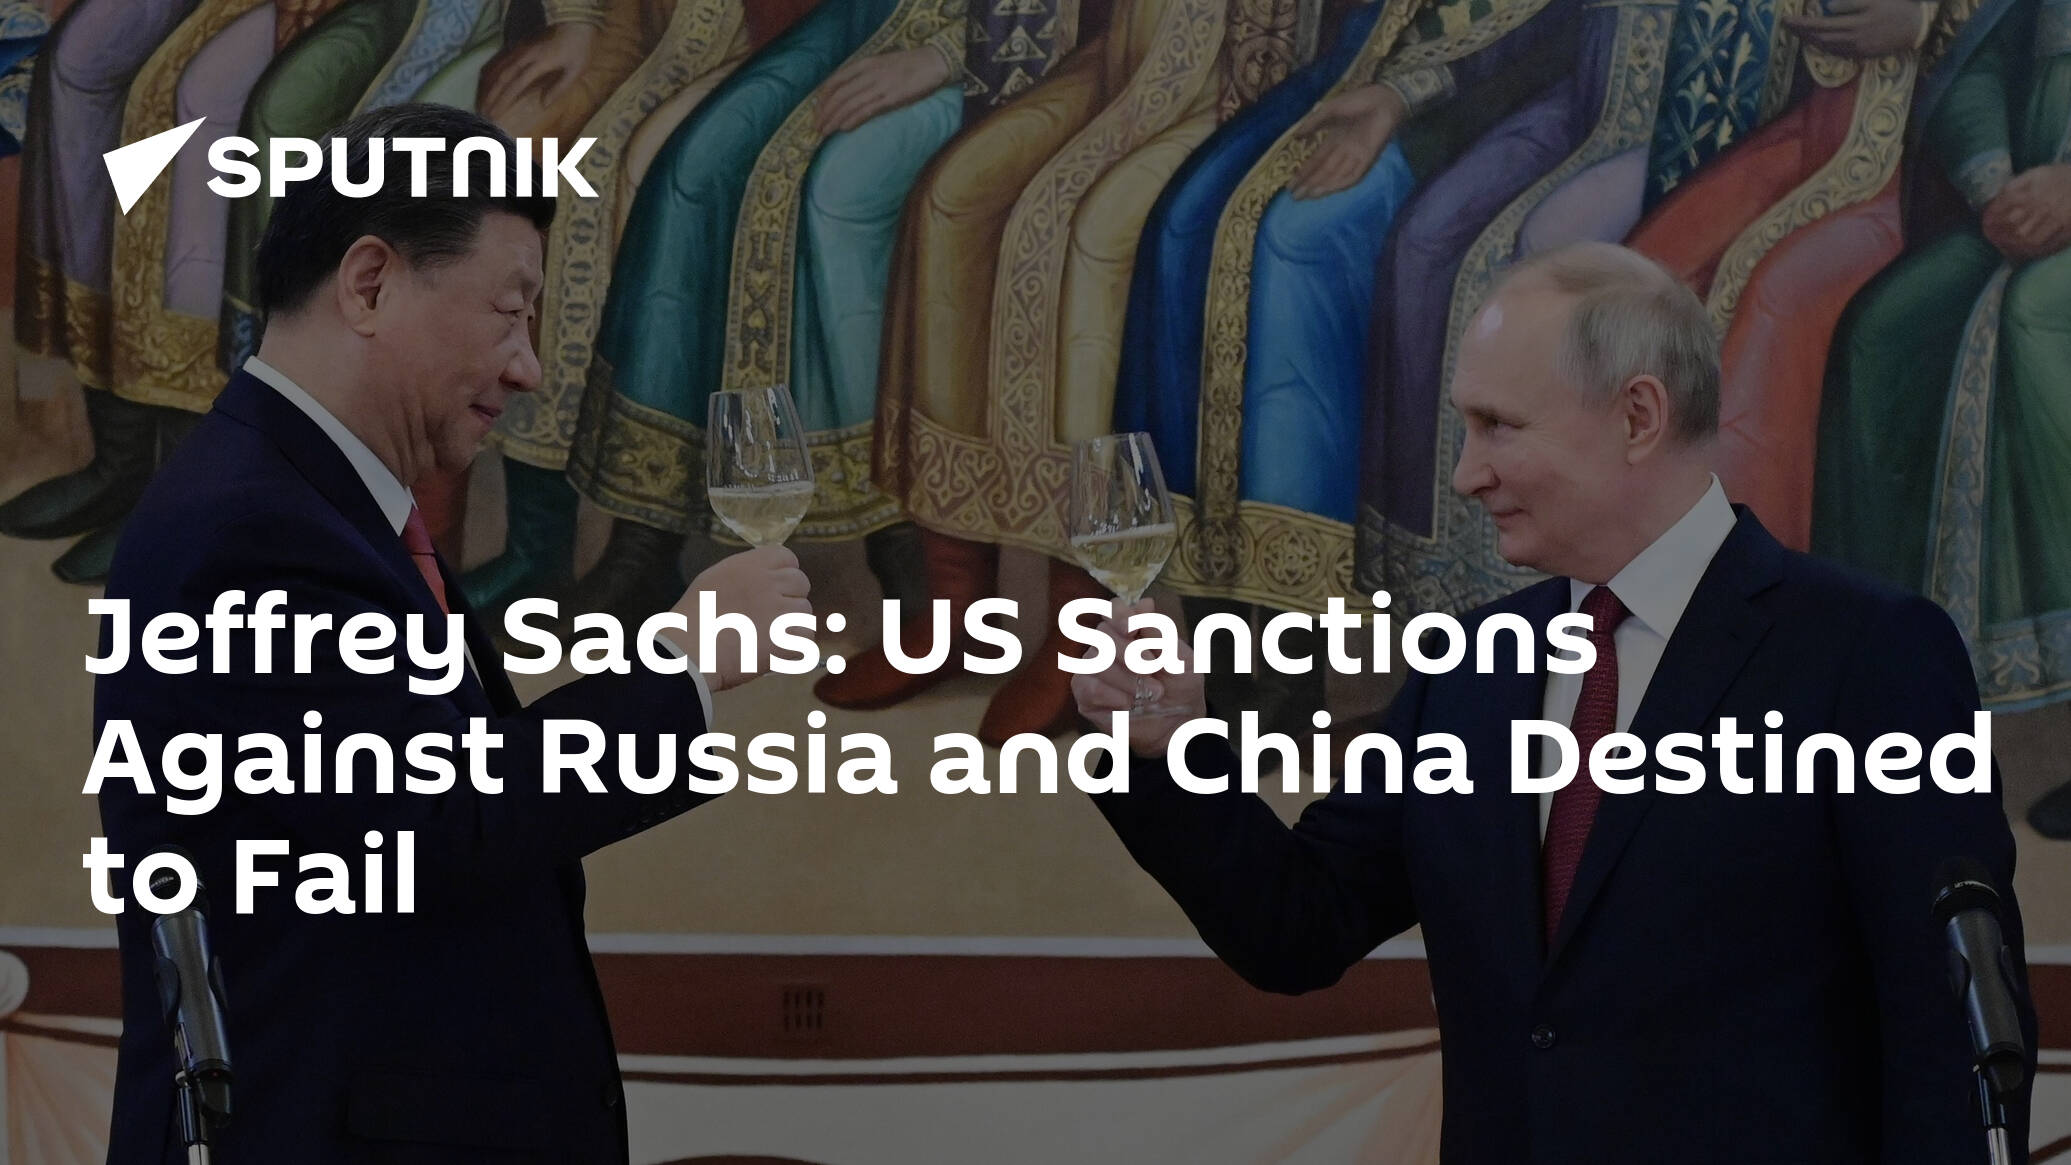 Jeffrey Sachs: US Sanctions Against Russia and China Destined to Fail